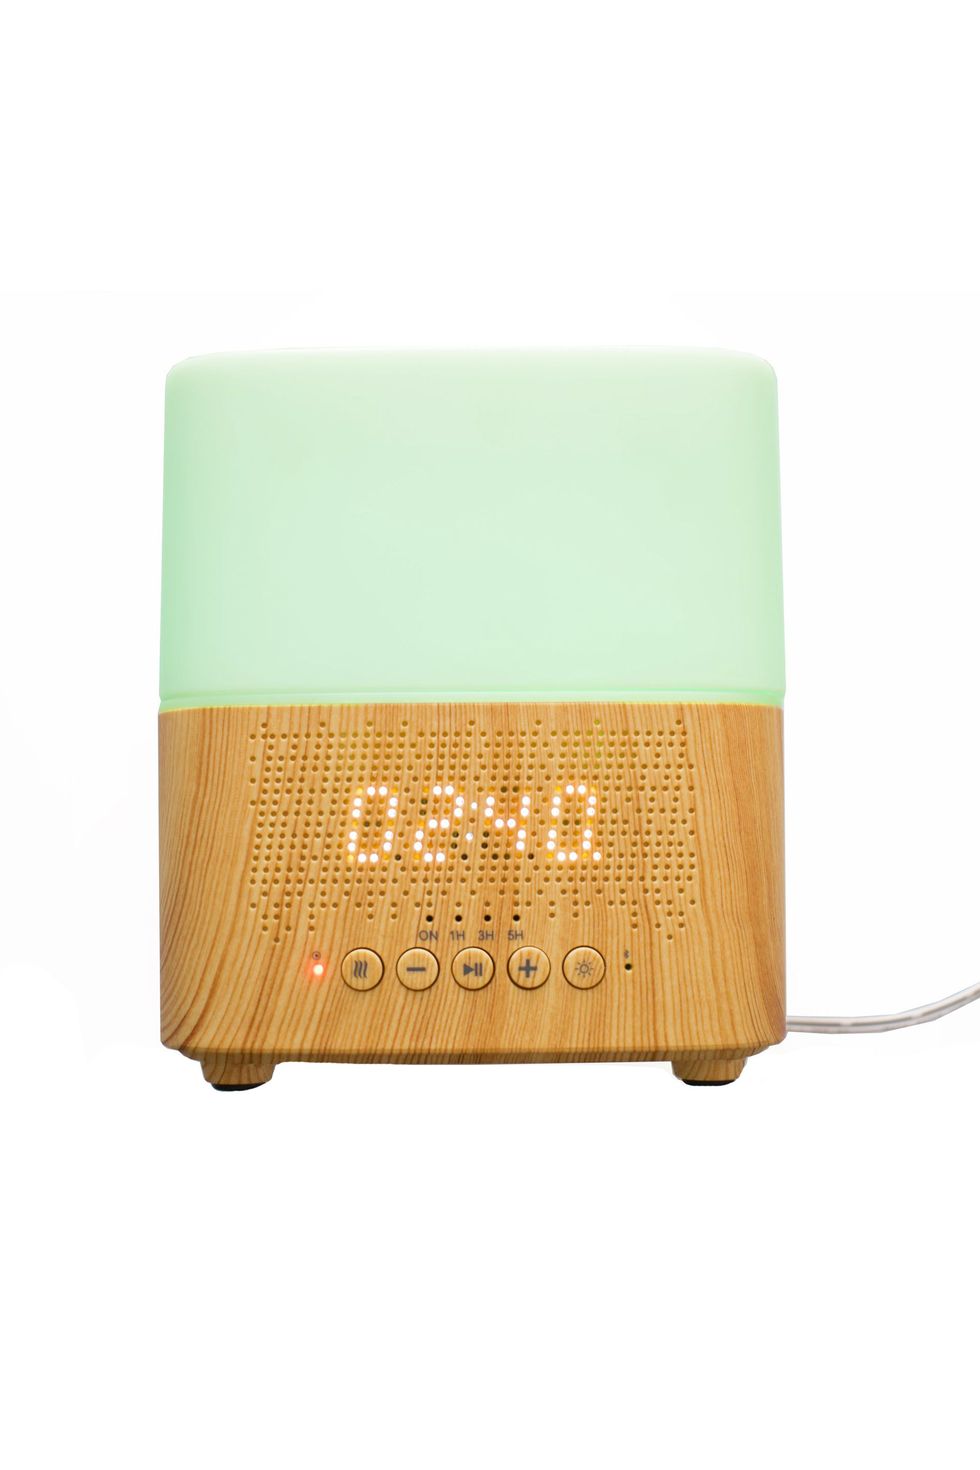 June & May  Diffuser With Built-In Speaker 